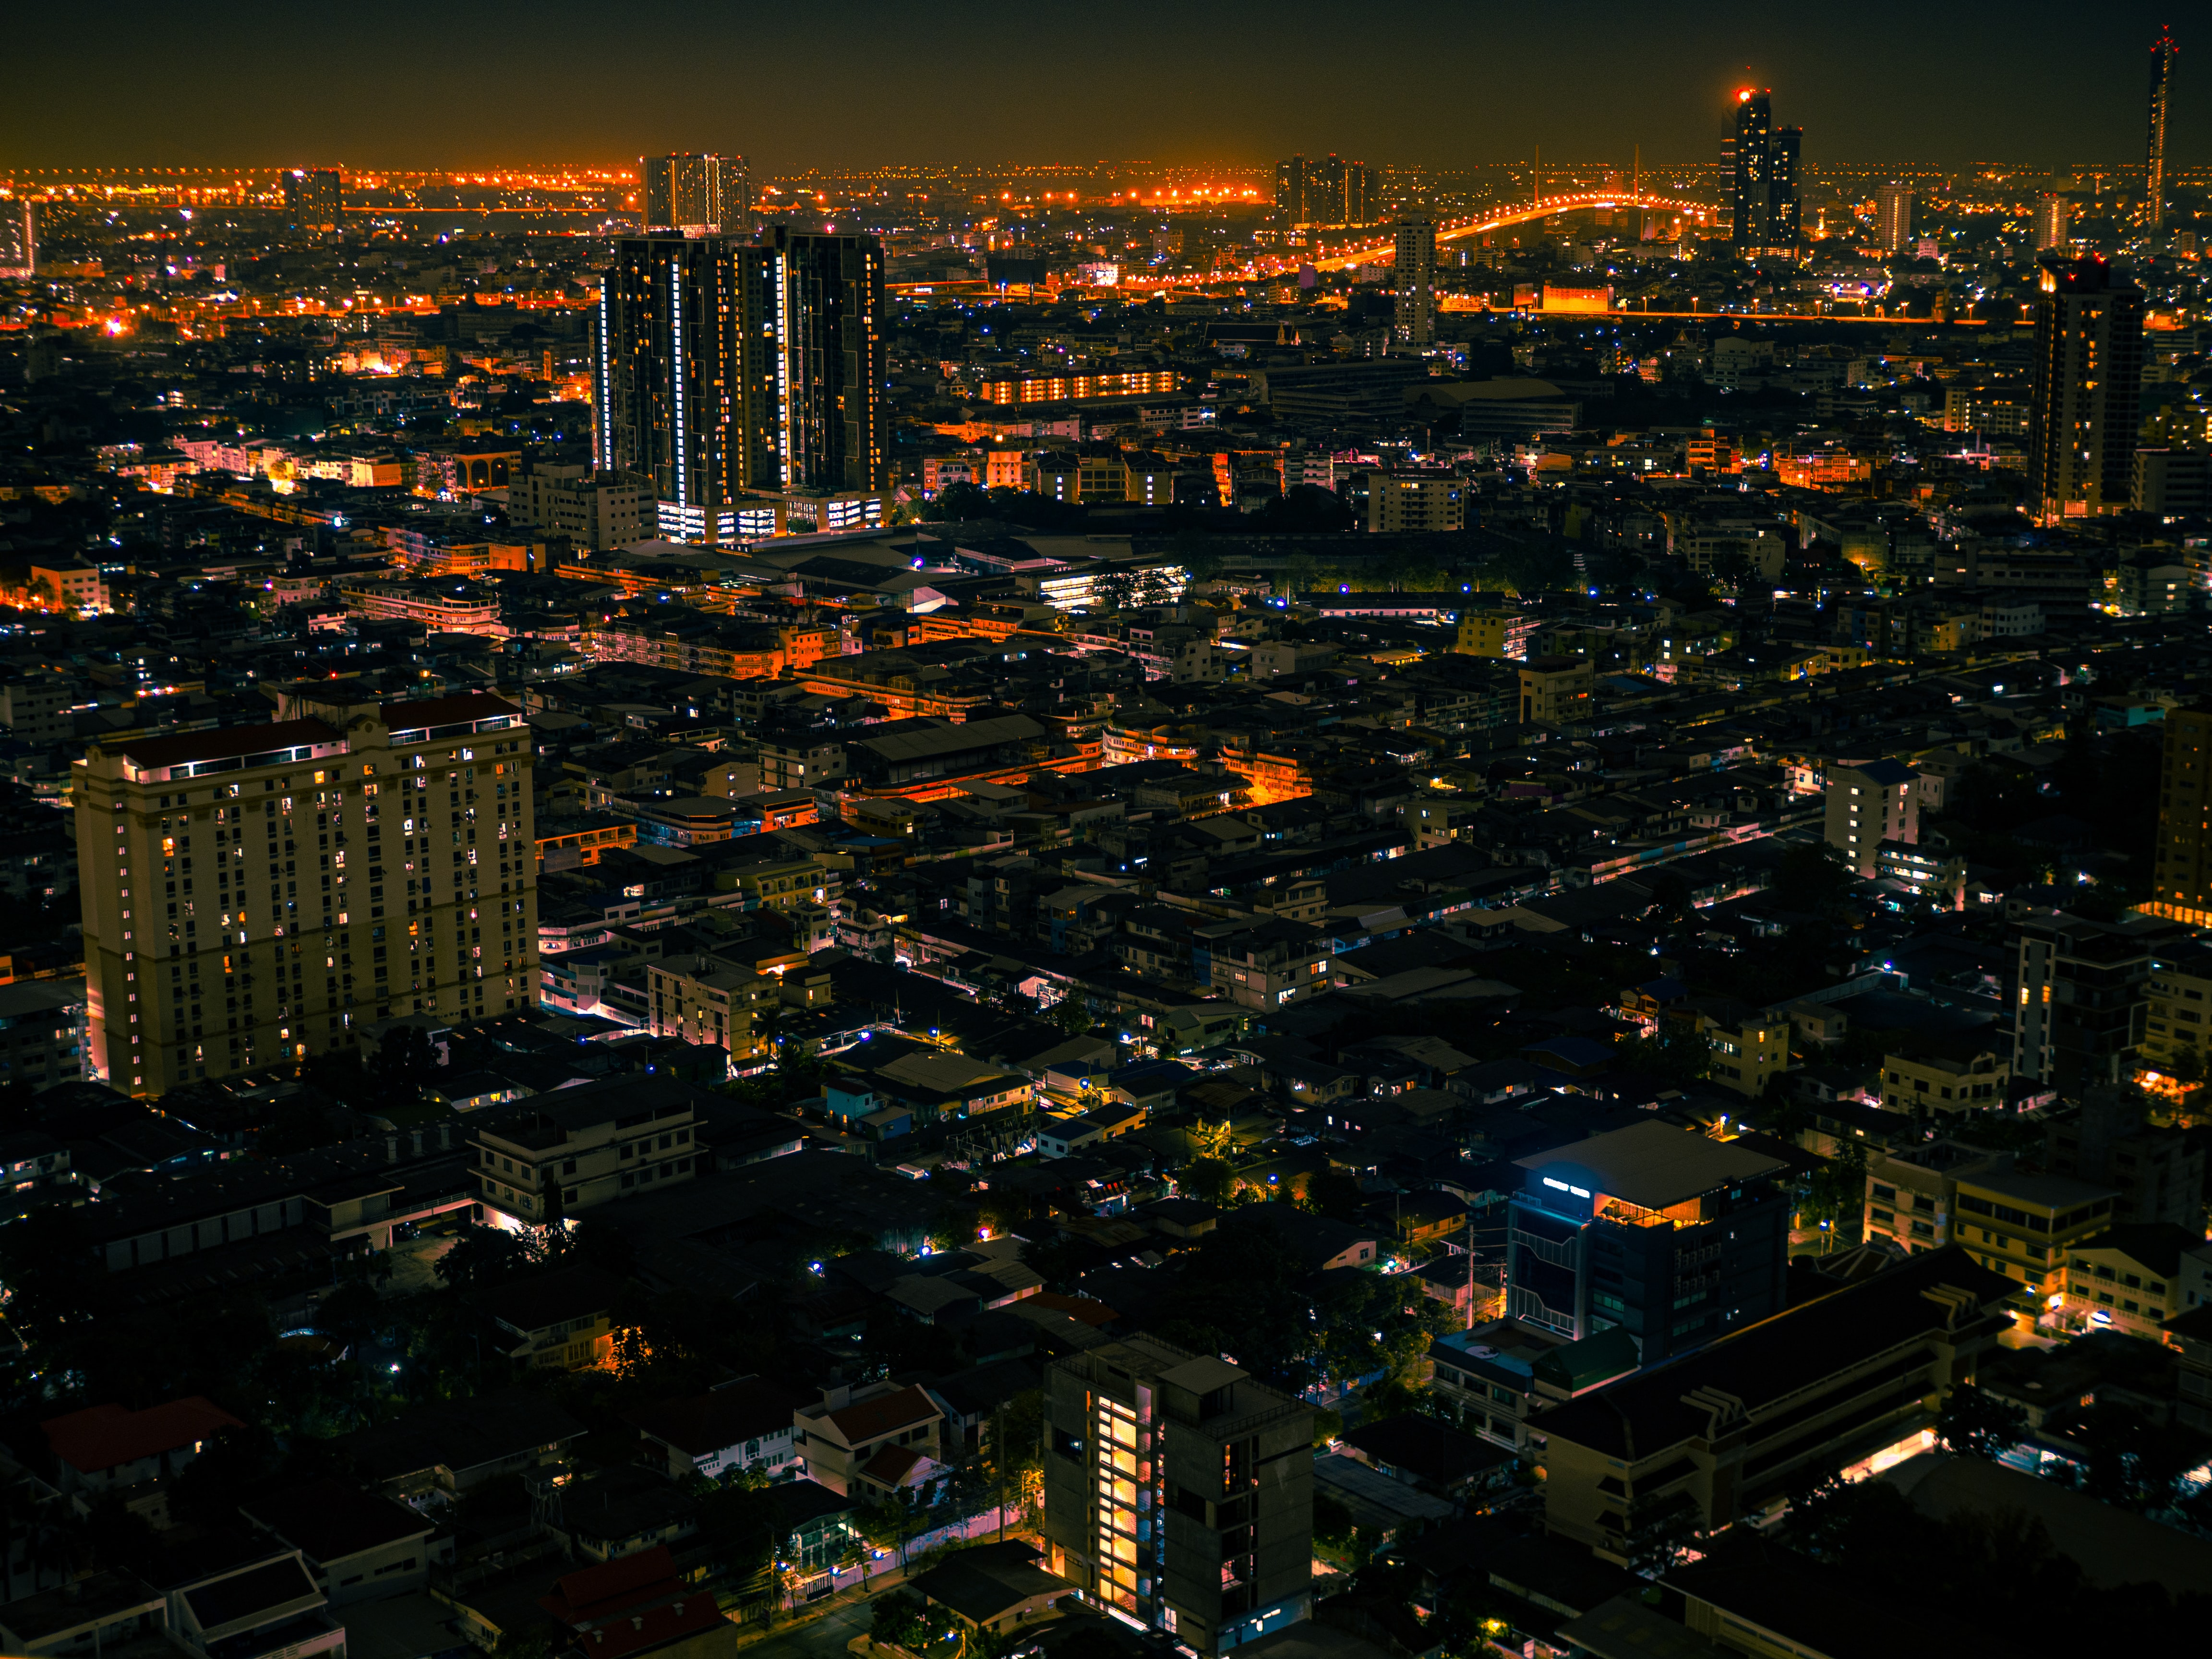 night city, streets, cities, lights, view from above